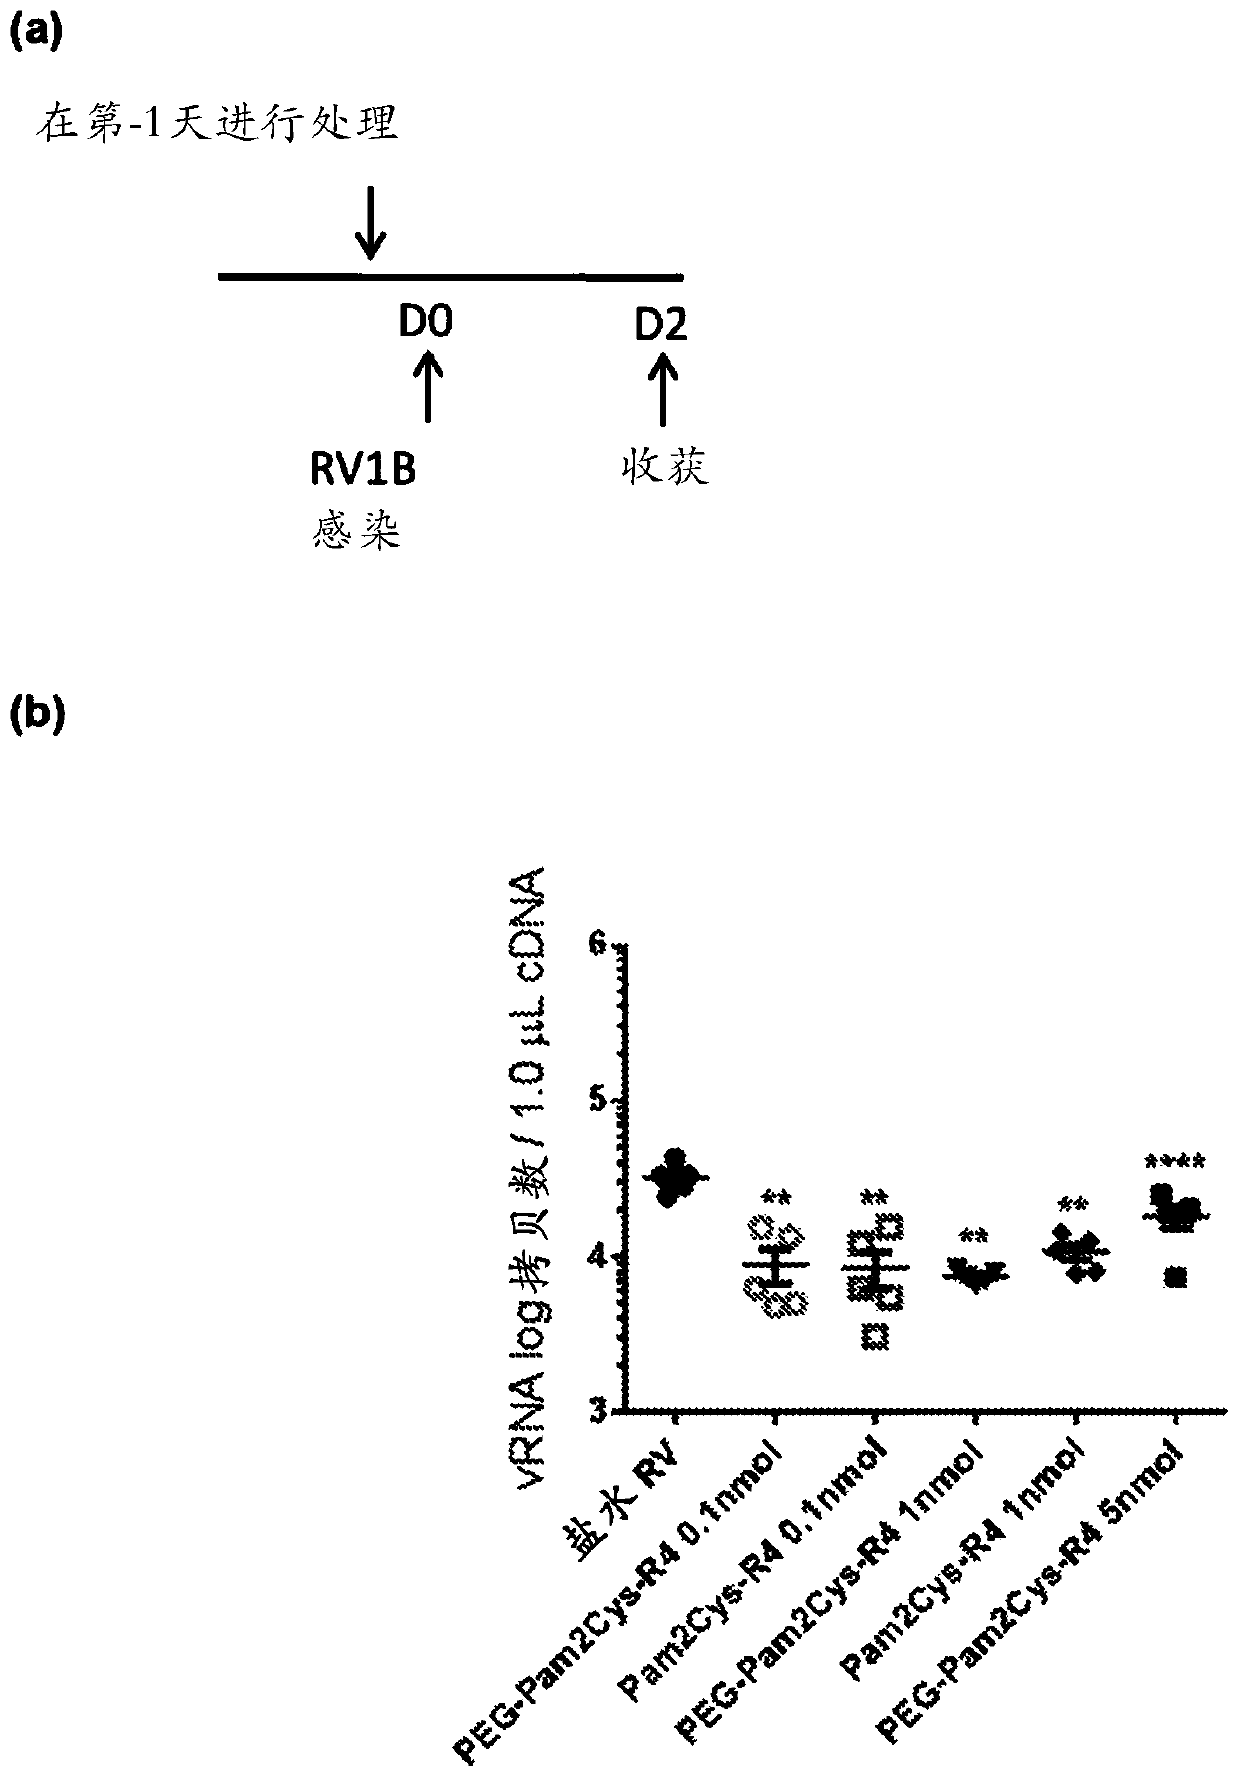 Treatment of respiratory infection with a tlr2 agonist